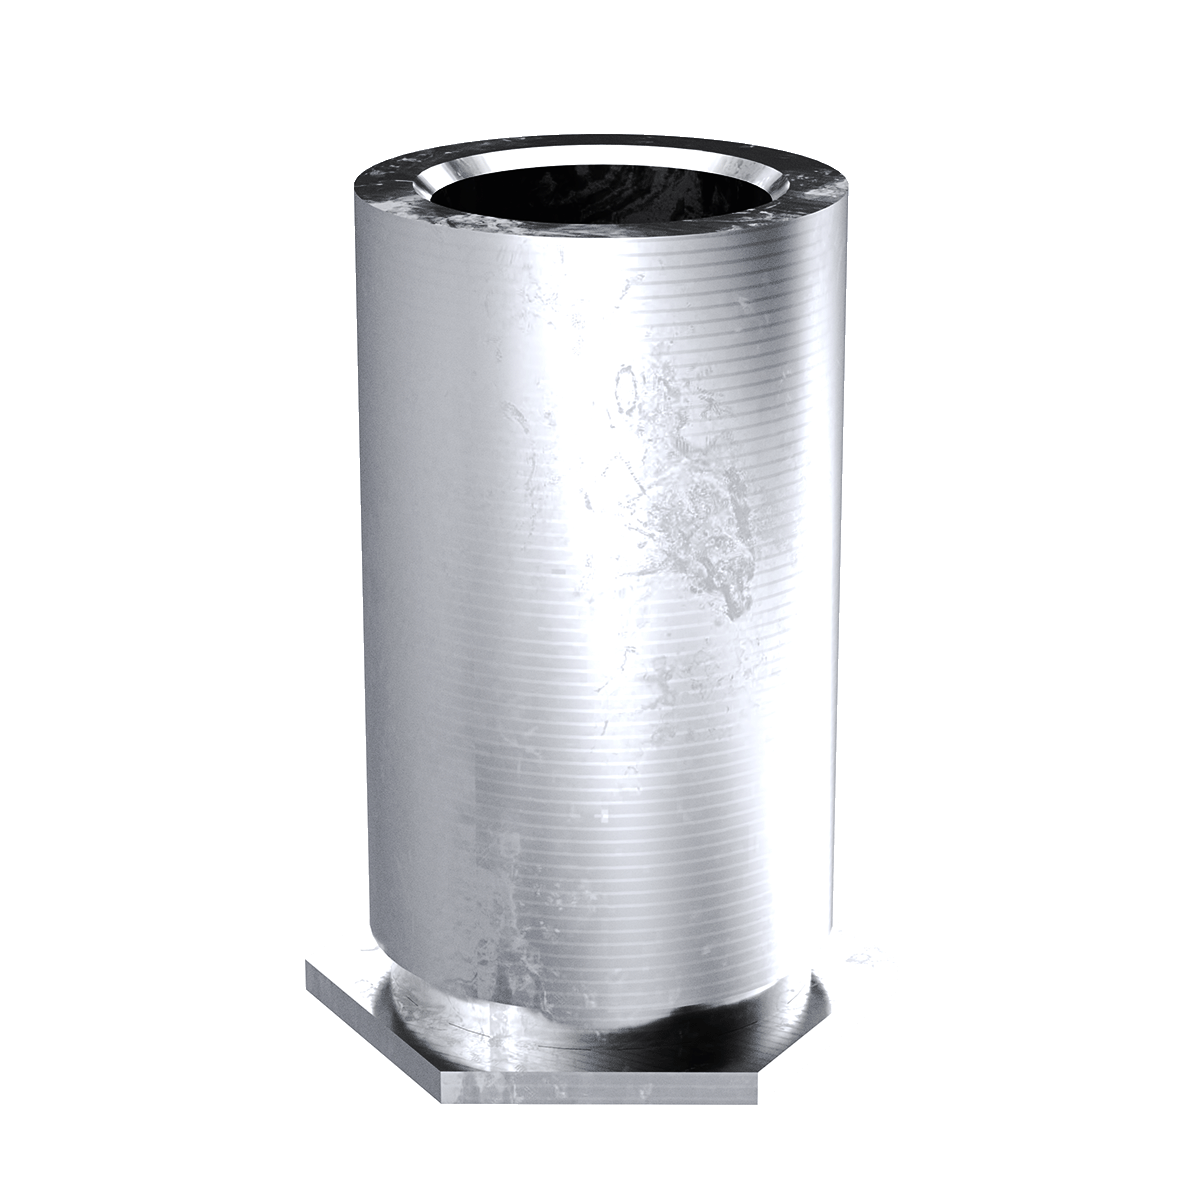 Self-Clinching Standoff, Through Unthreaded, 300 Series Stainless Steel, Passivated, 4.1 x 12, 100 Pack